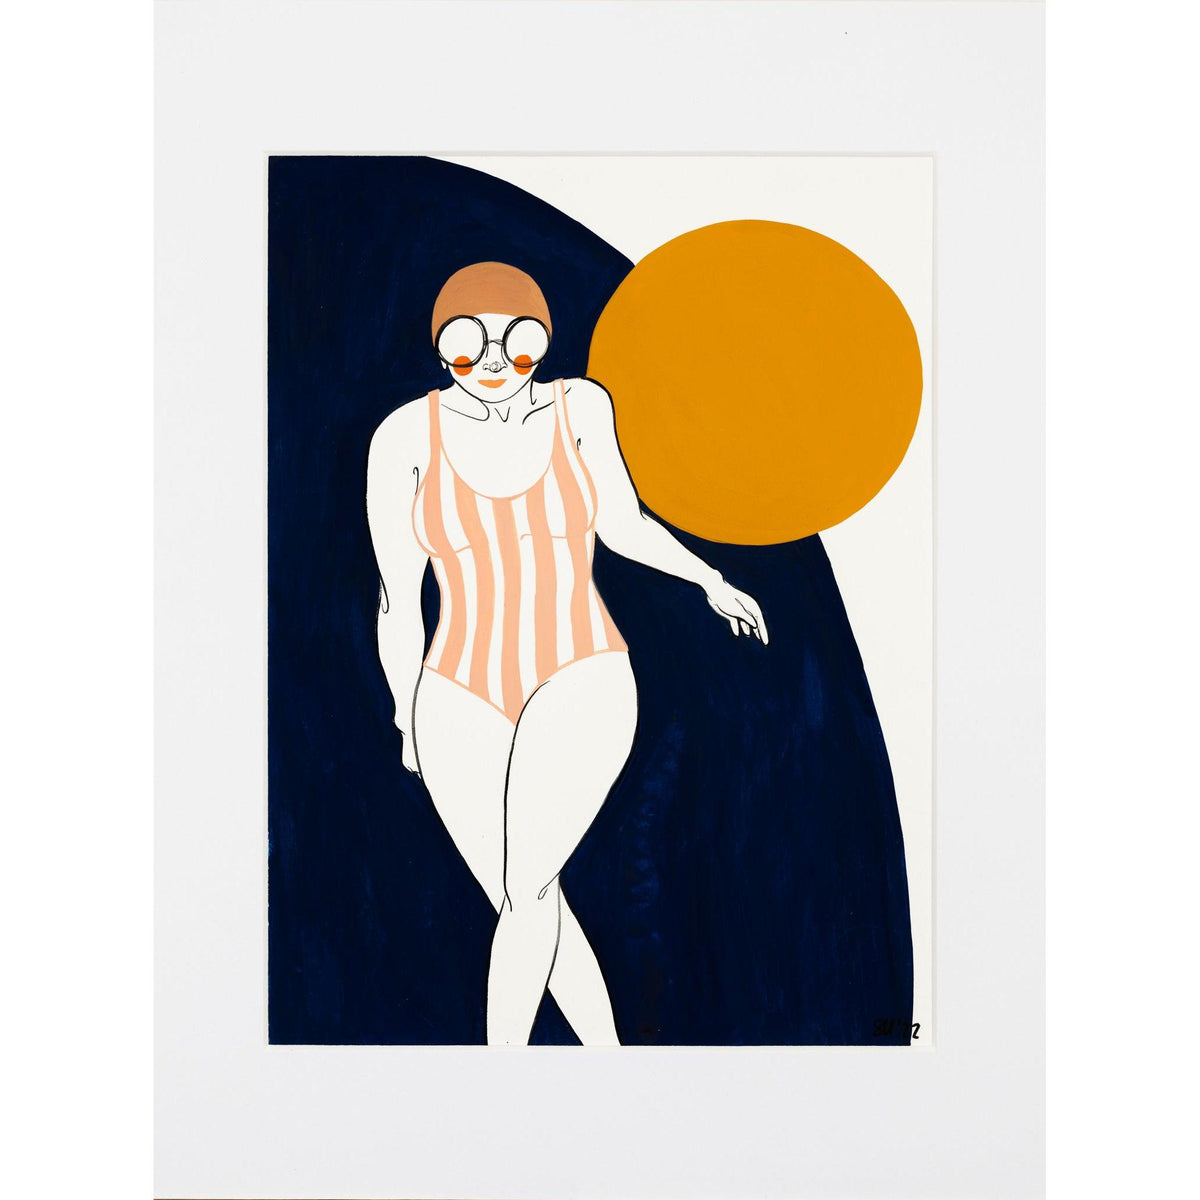 &#39;Sunset Swimmer No6&#39; original gouache by Sophie Moore, available at Padstow Gallery, Cornwall